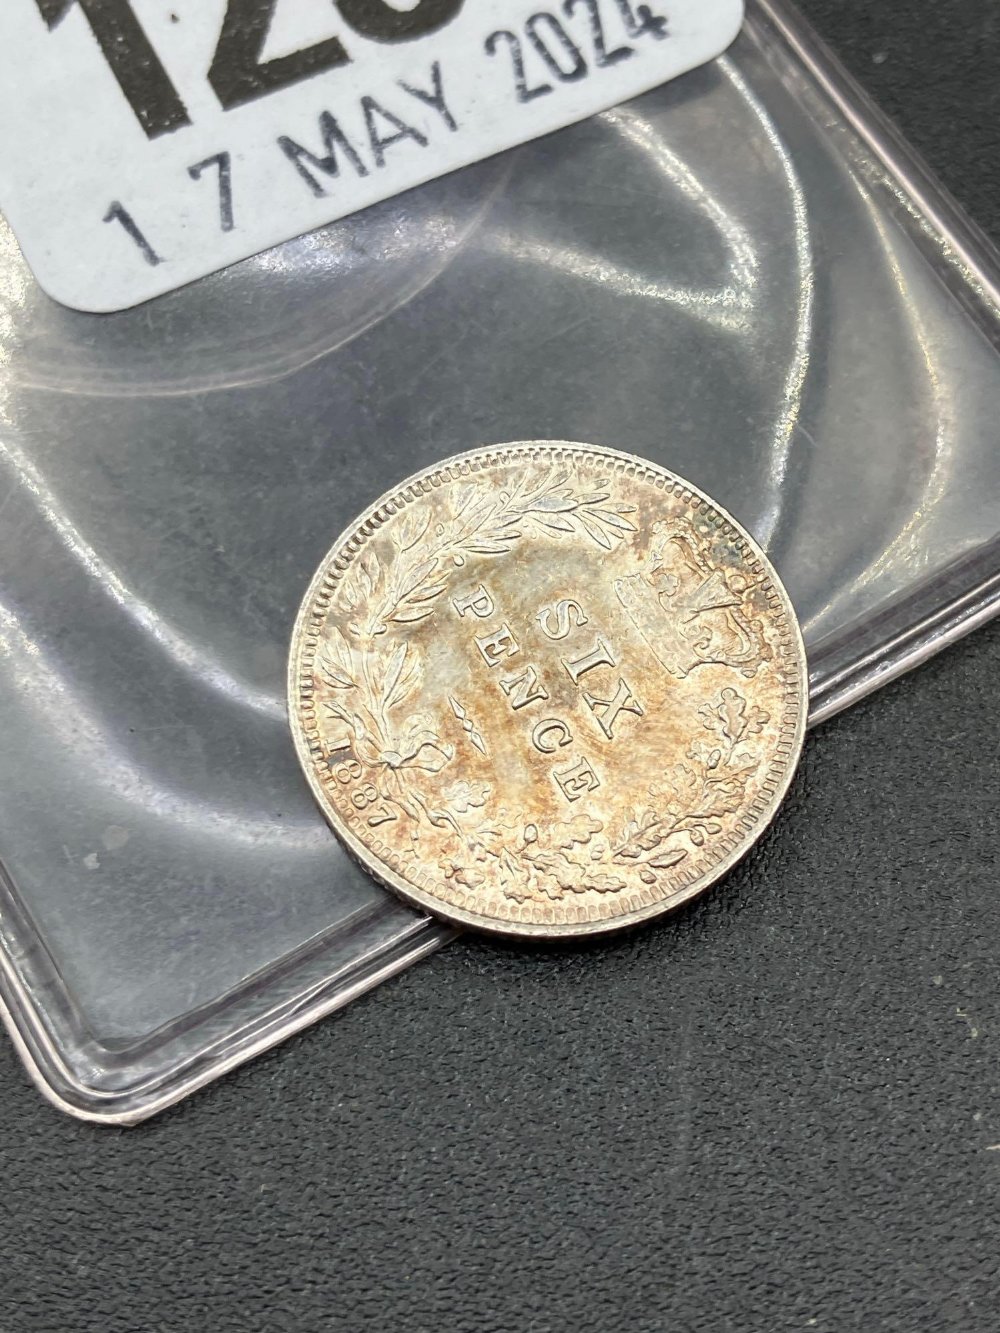 Victoria Young Headd sixpence 1887 UNC